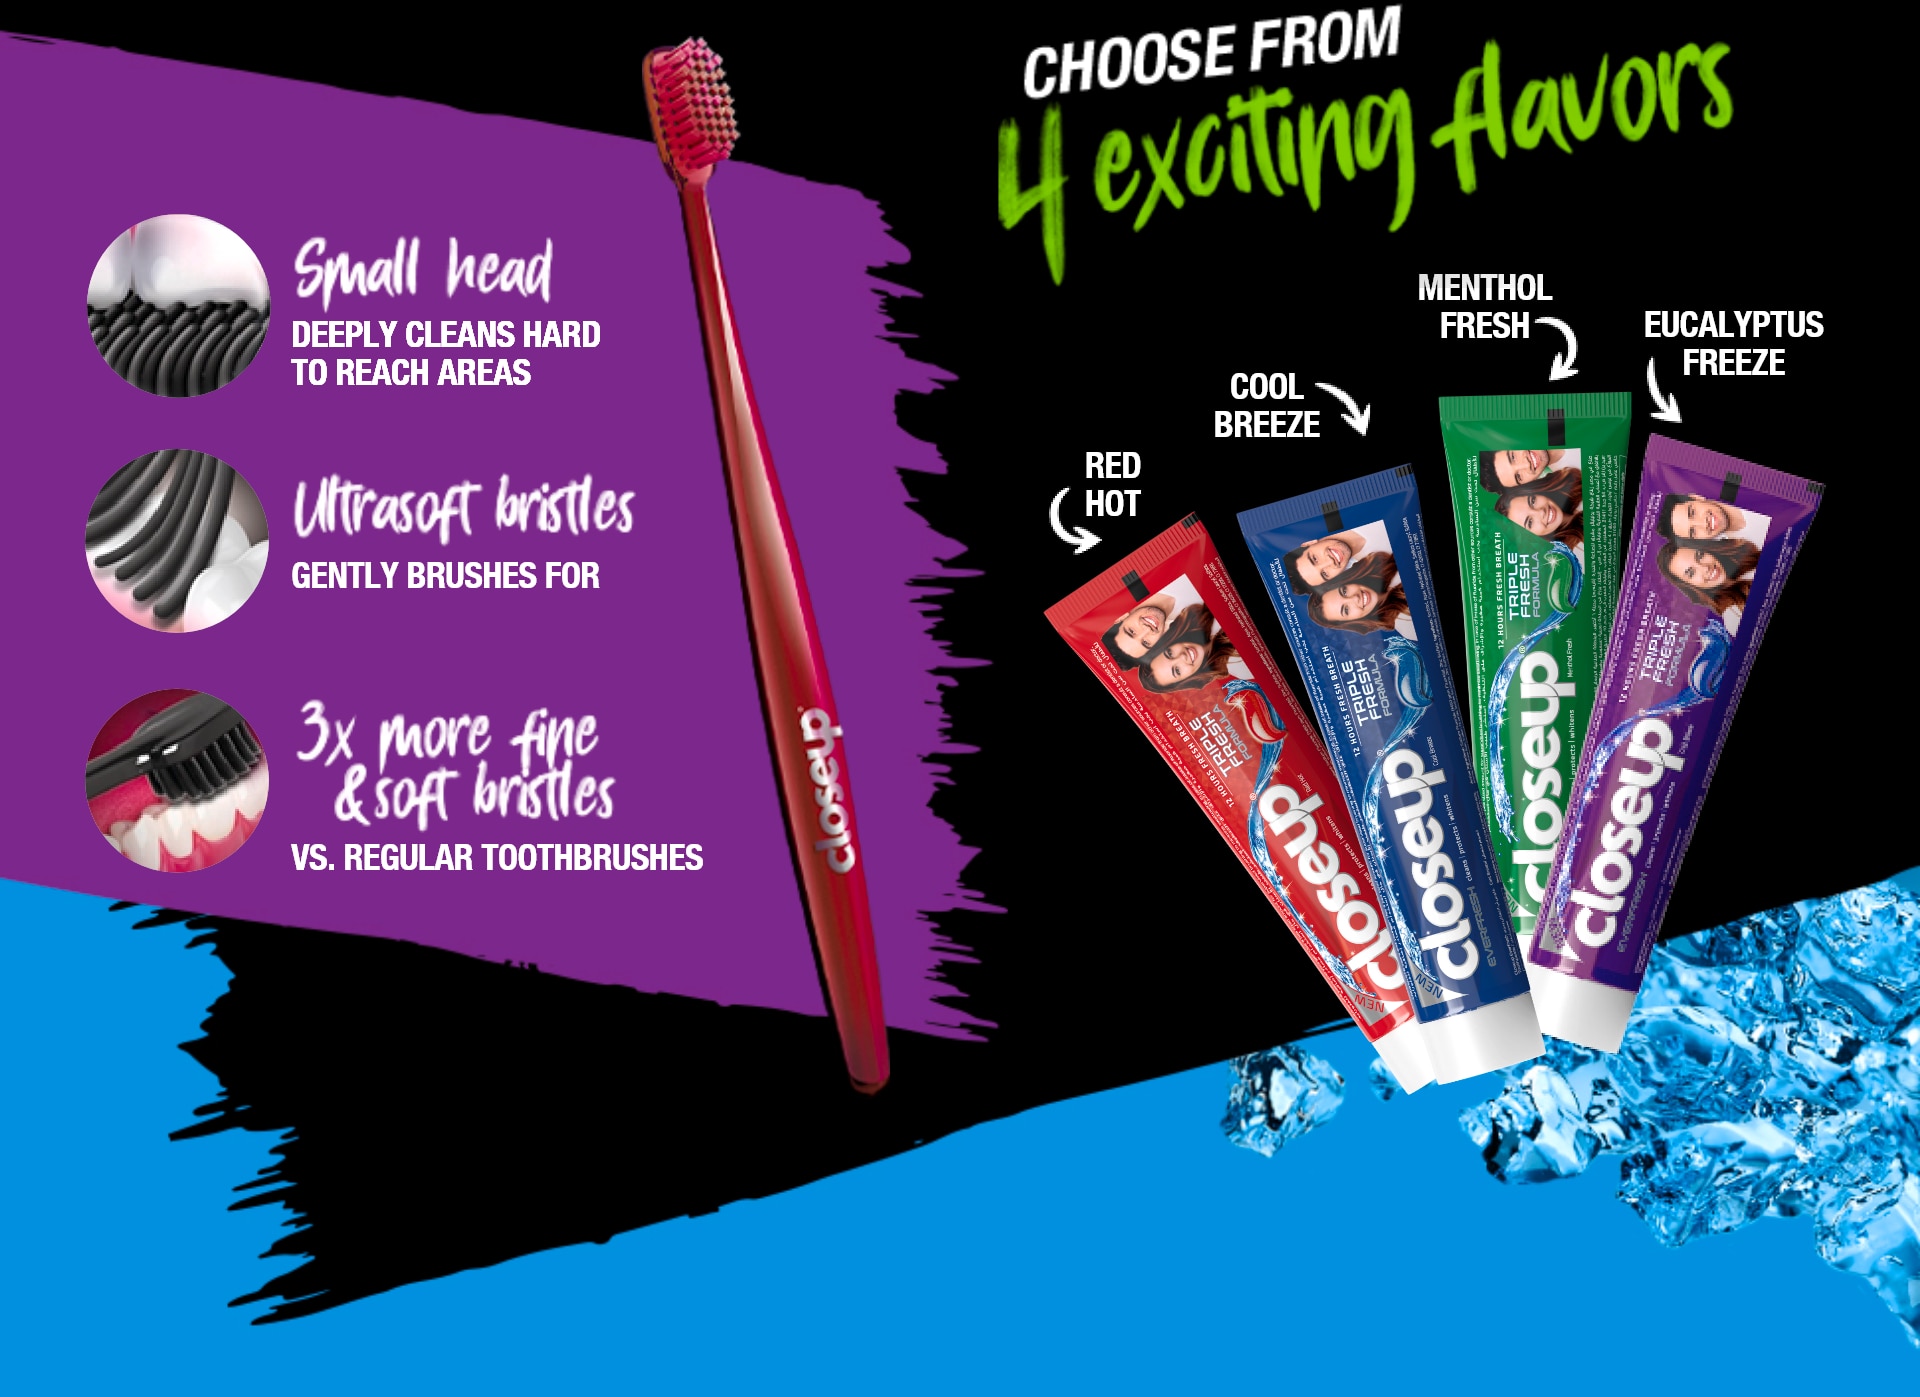 choose from 4 existing flavors